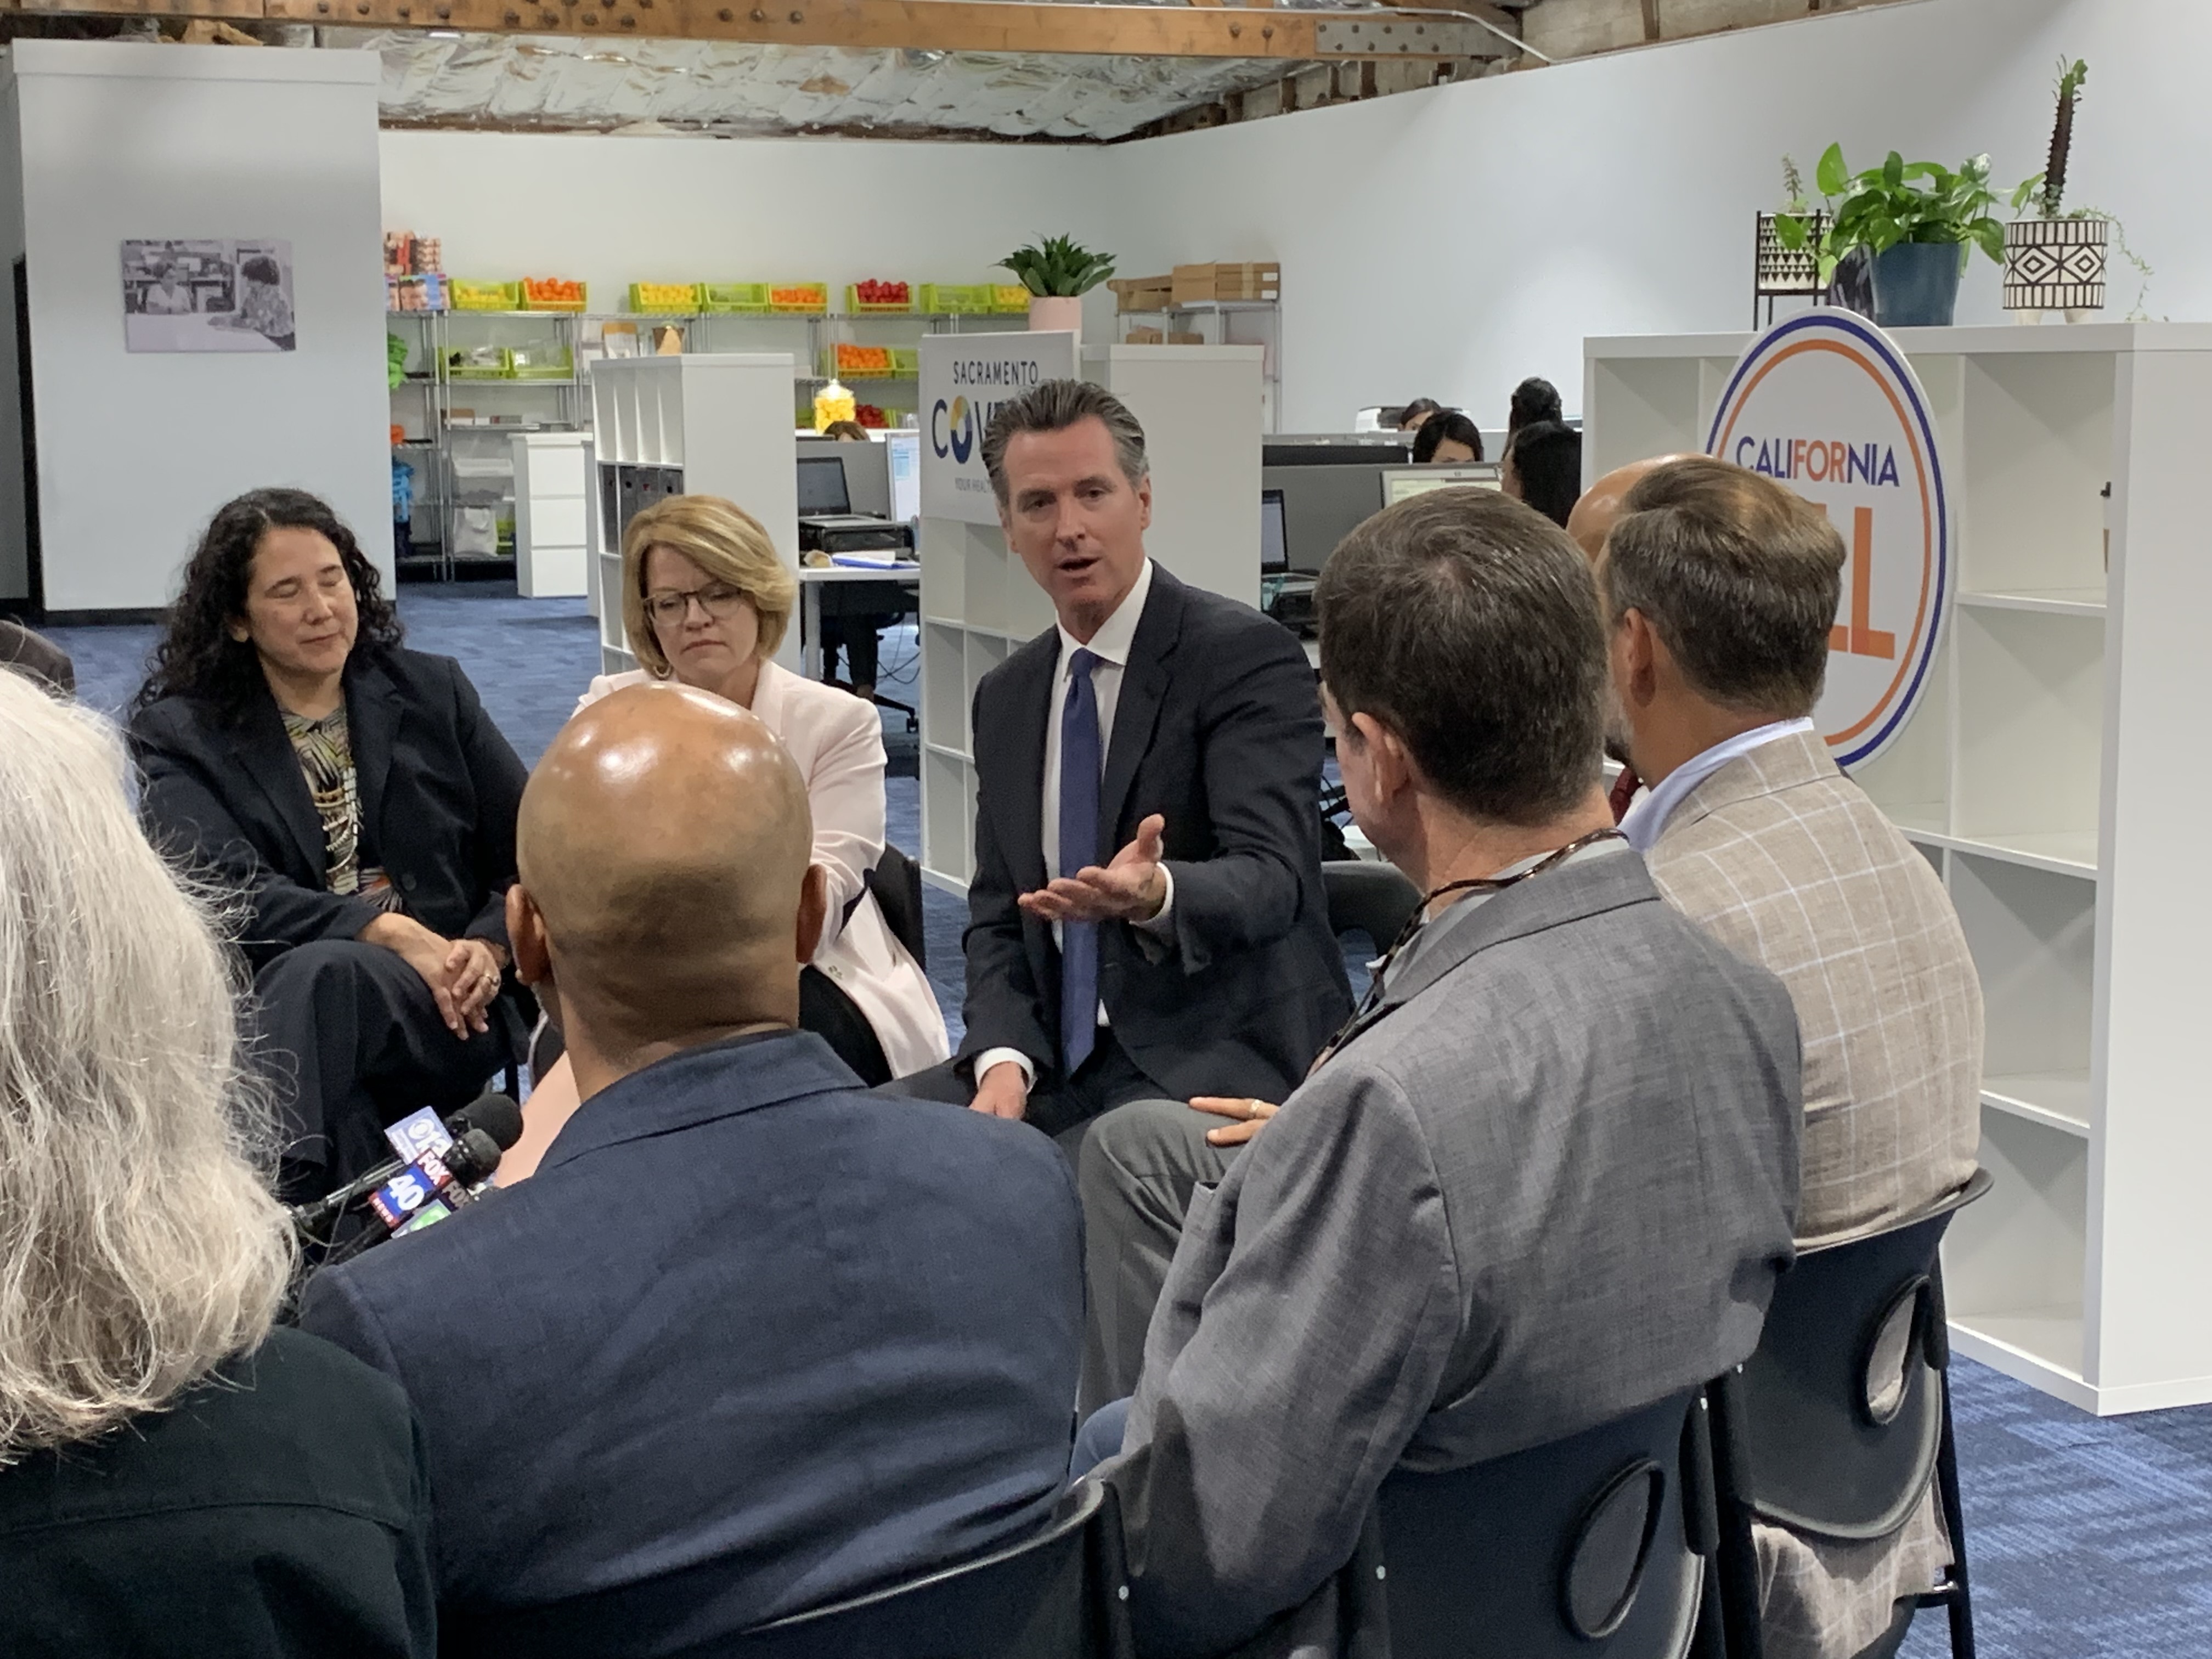 Newsom Launches Statewide 'California for All' Health Care Tour in Sacramento